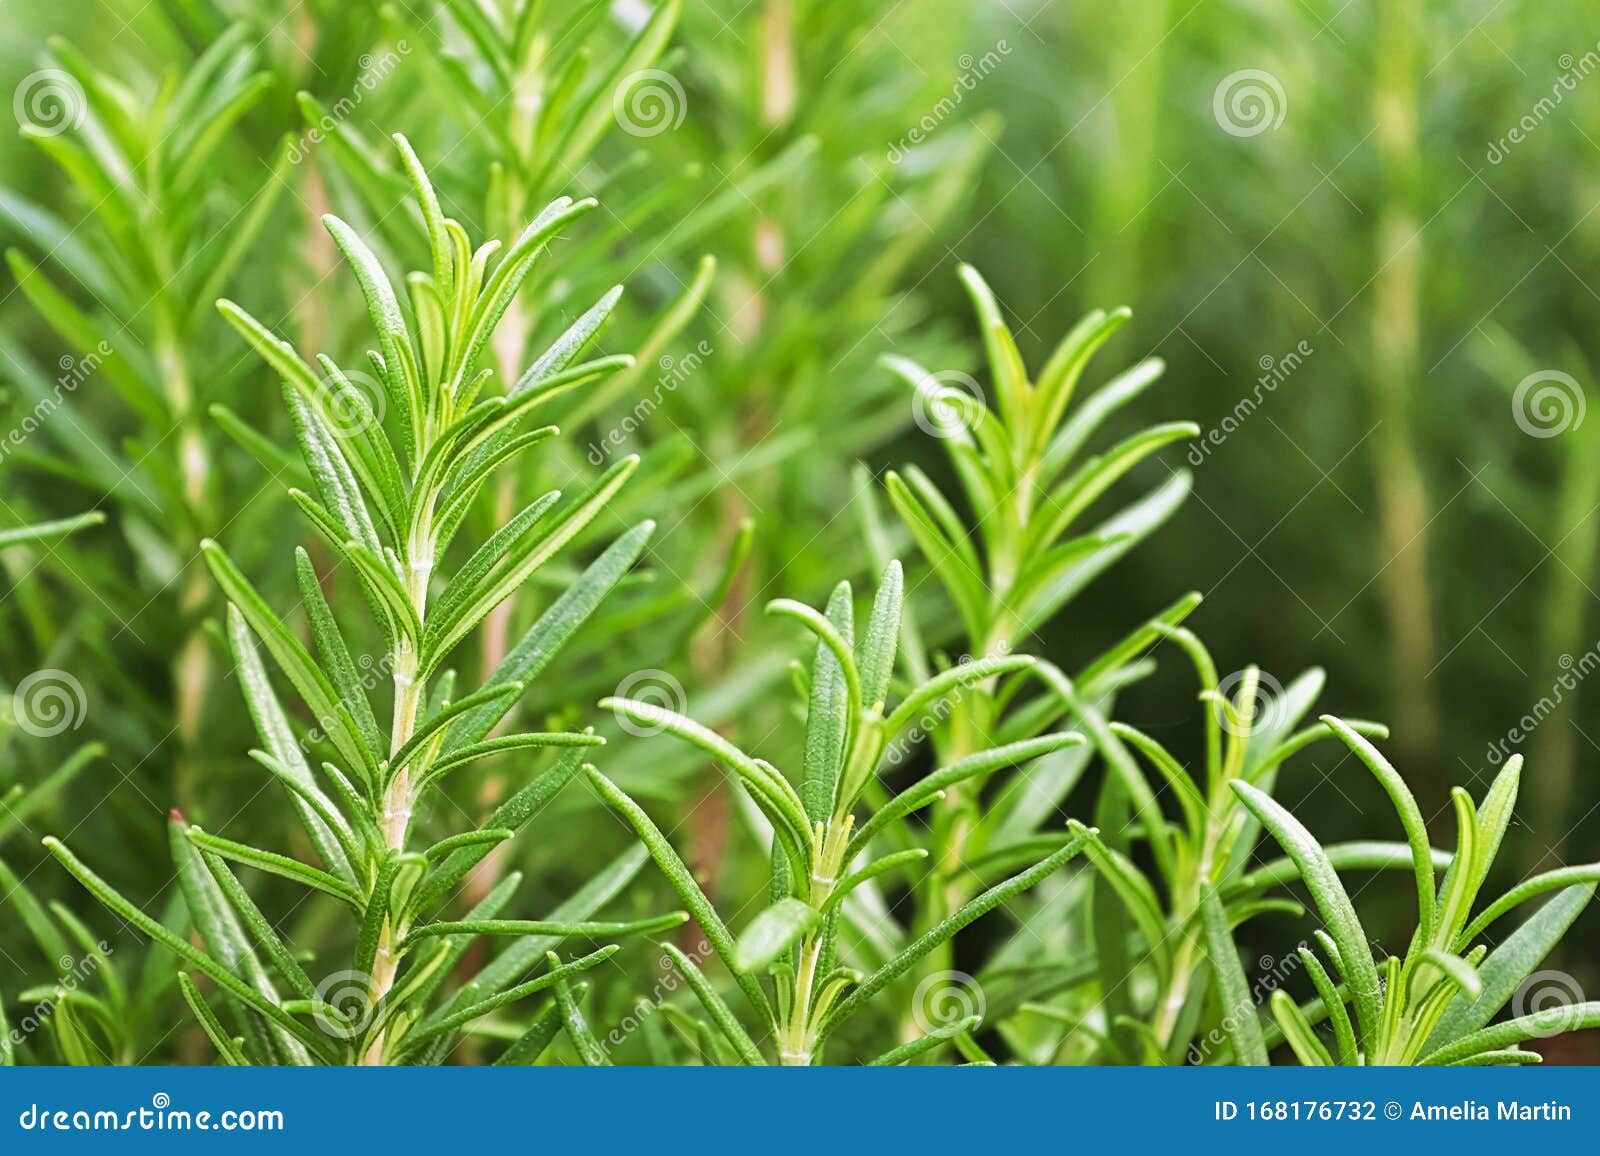 background of green fresh rosemary herb bunches